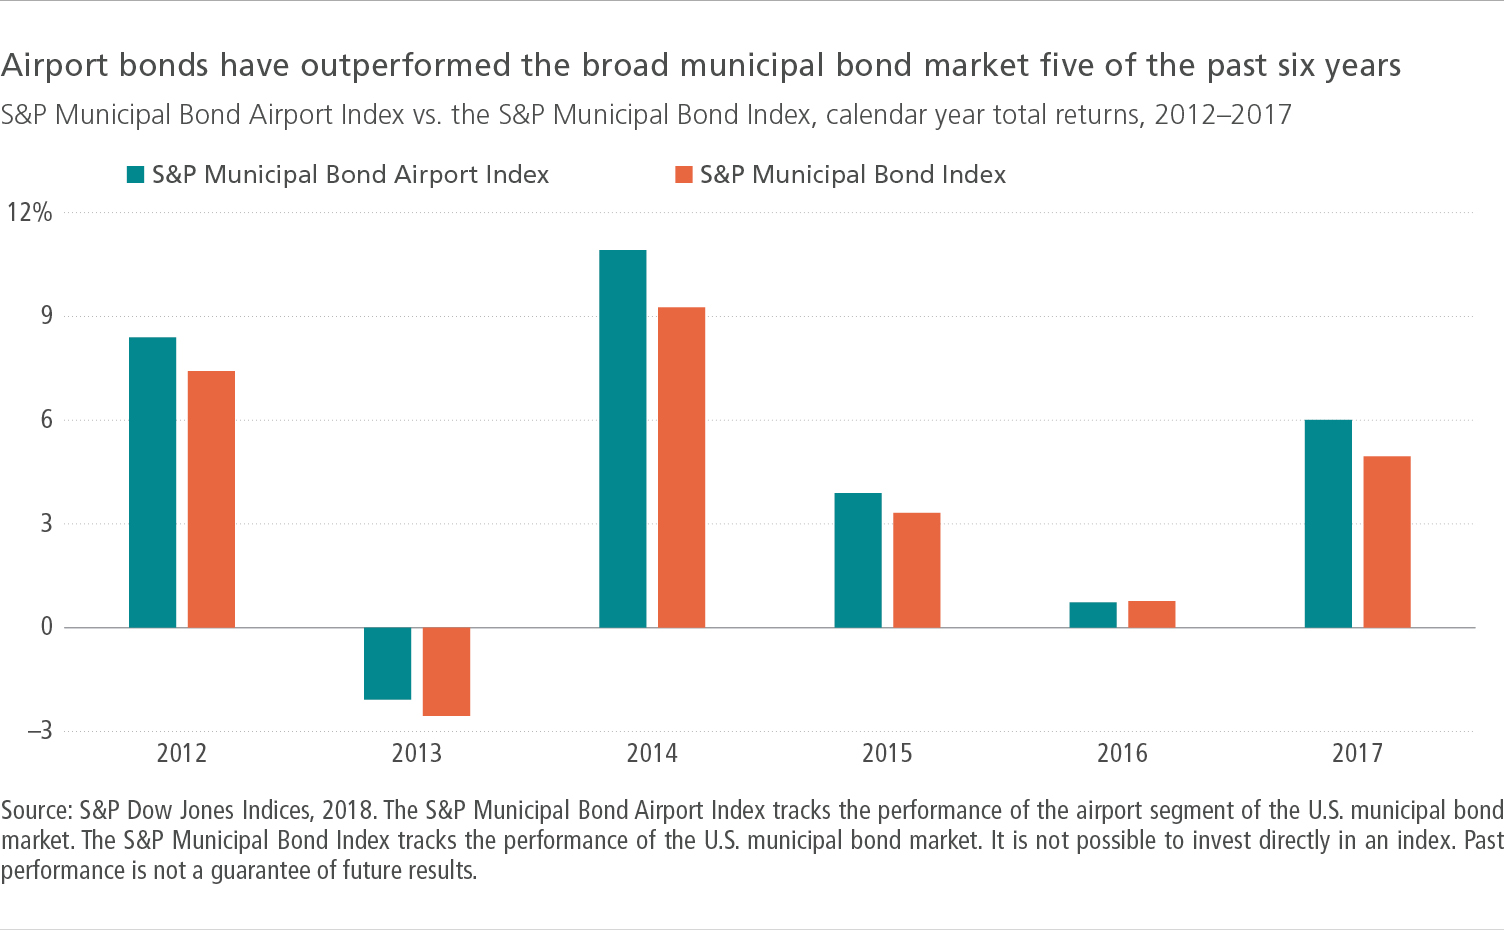 Airport bonds have outperformed the broad municipal bond market 5 of the past 6 years